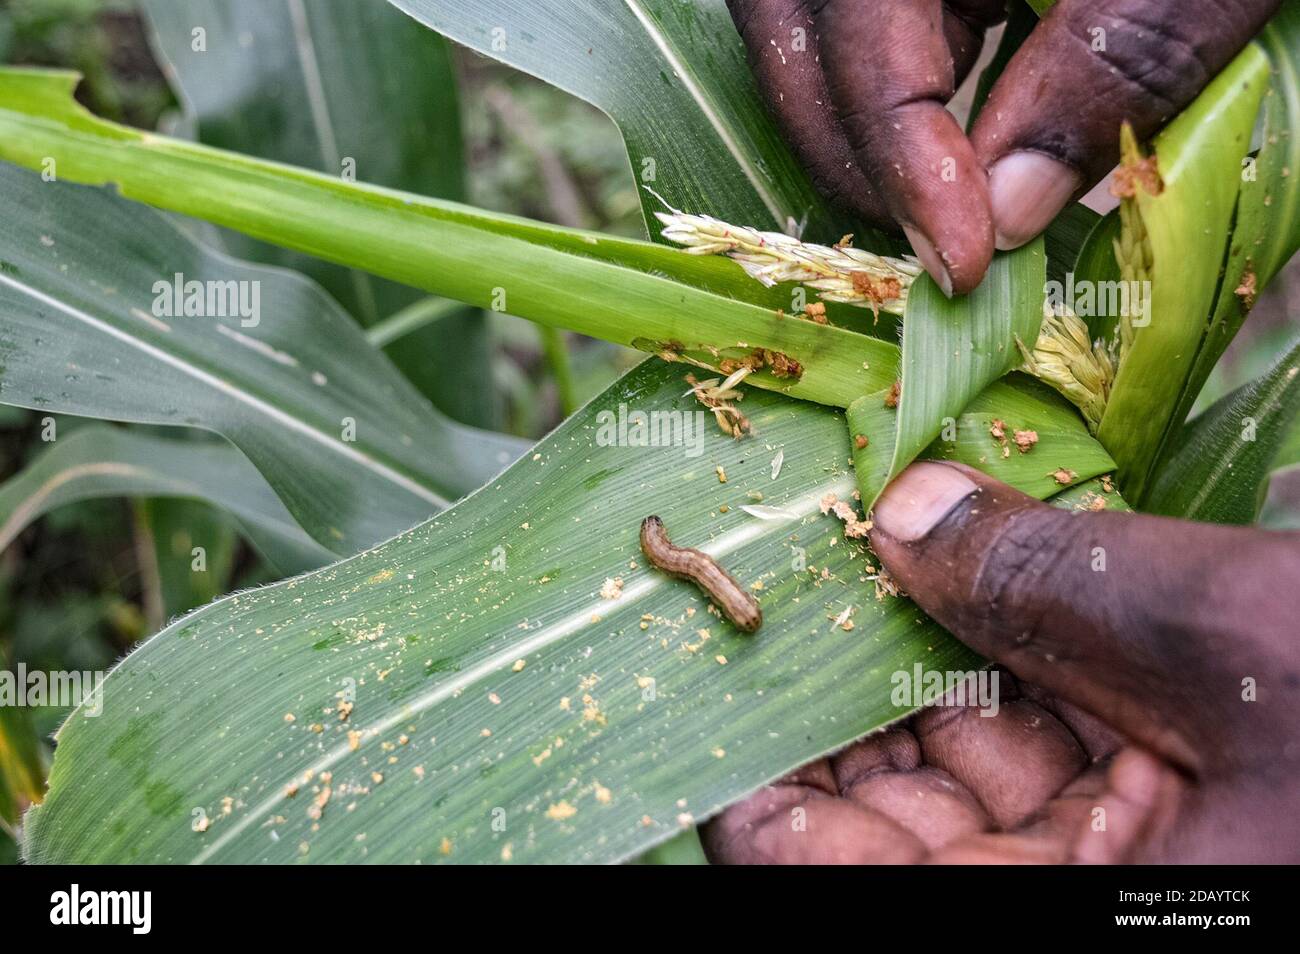 On Edward Nsubuga’s 12-acre farm in Lutisi, a village in the country’s central Wakiso district, an infestation of armyworm is causing damage to his maize crops. Stock Photo